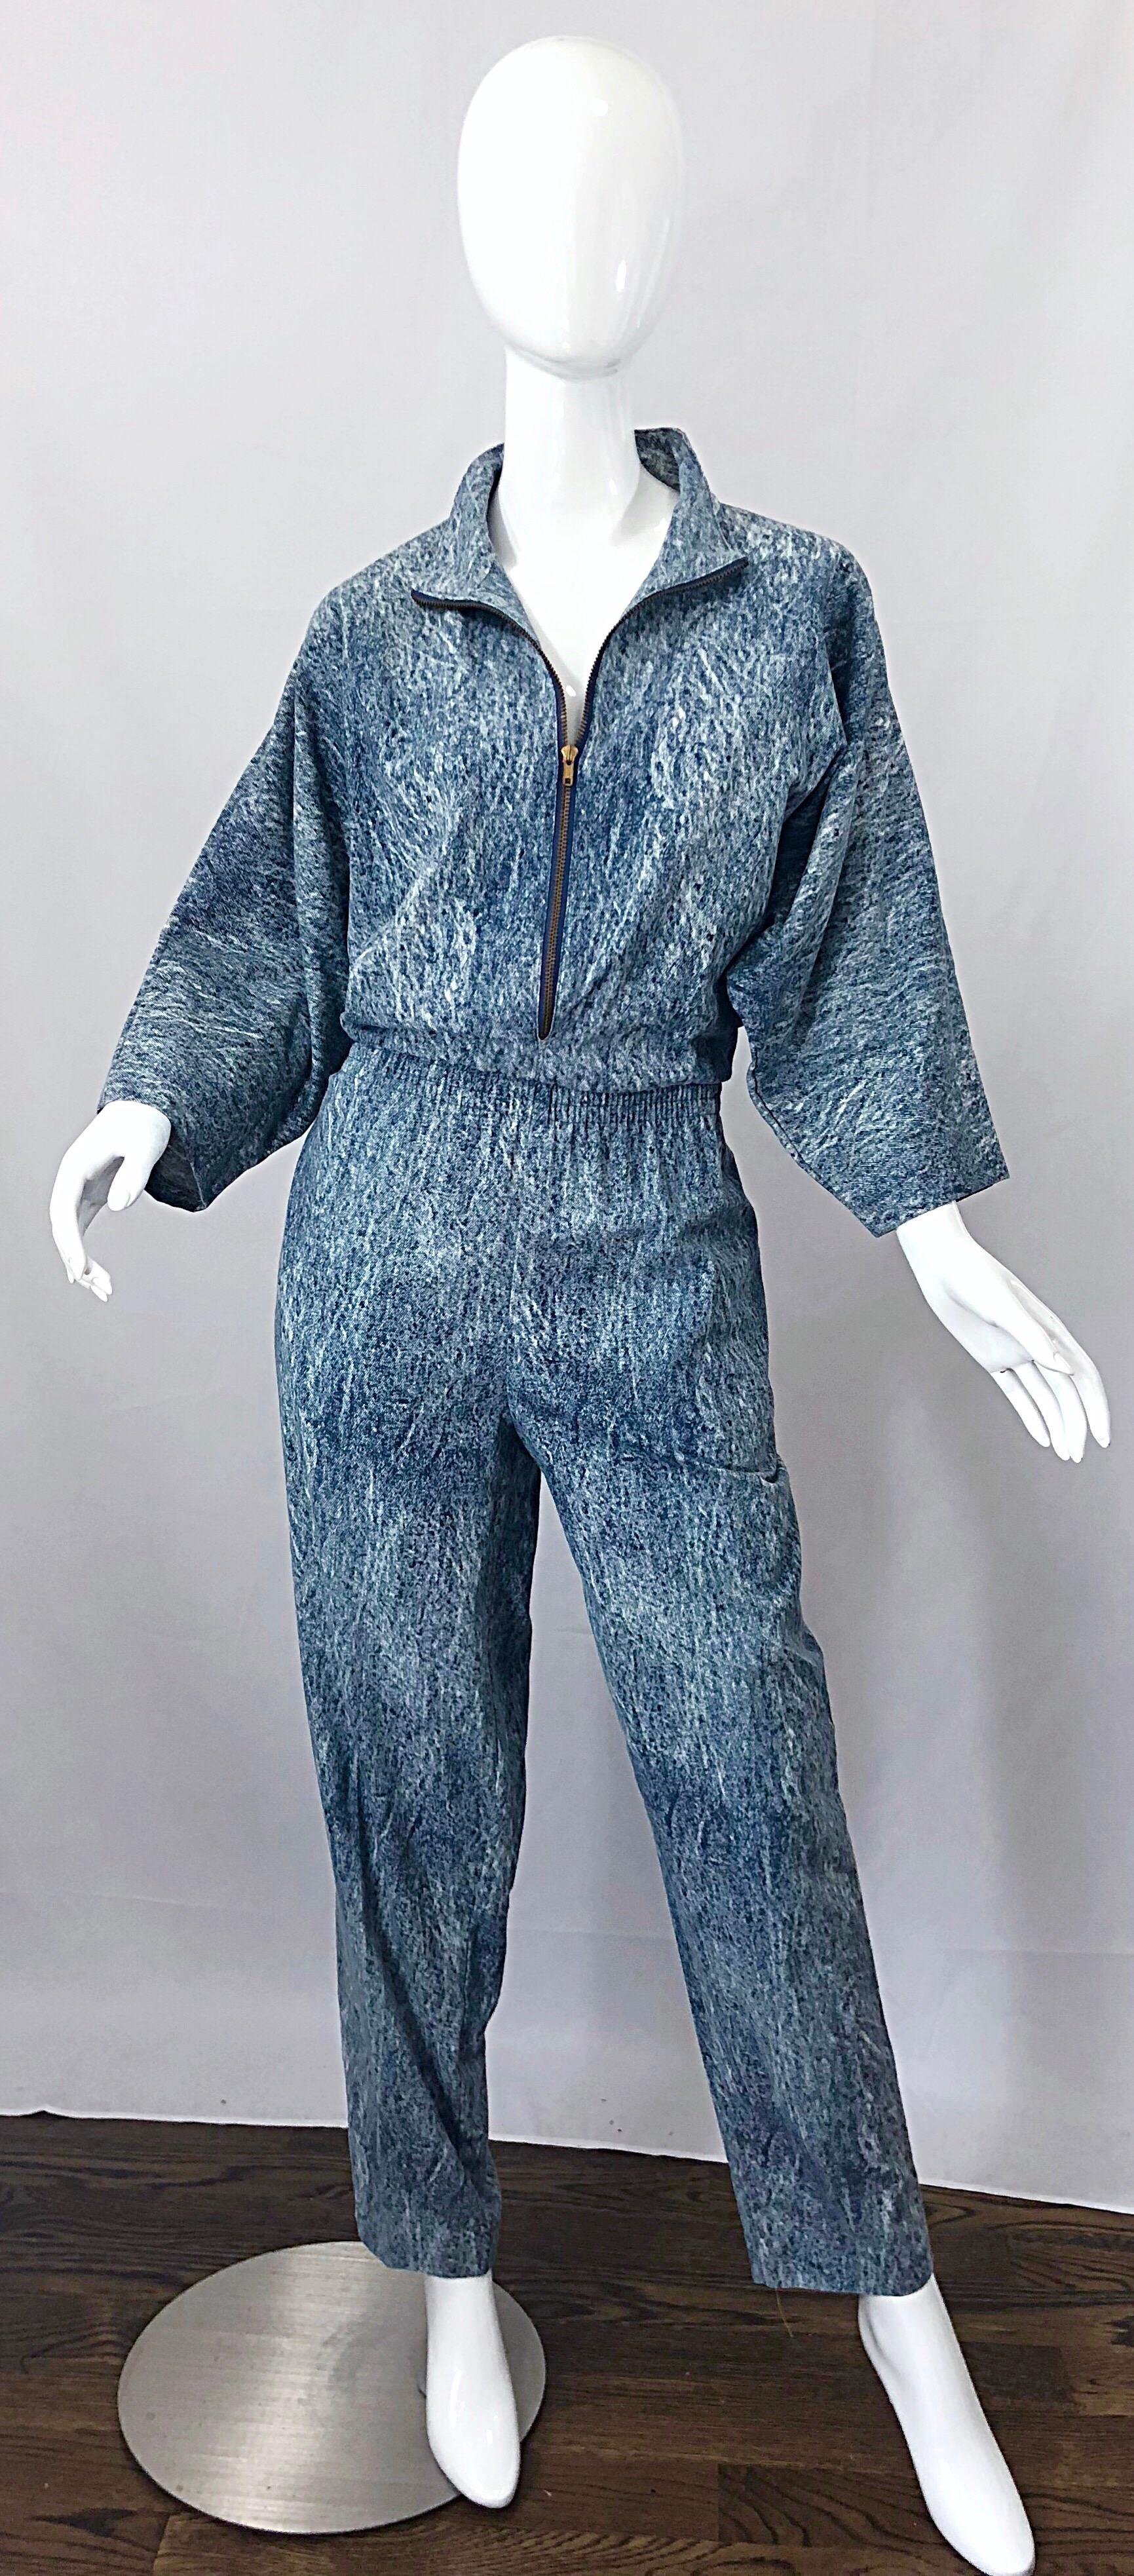 Awesome Avant Garde 1980s stone acid wash blue denim dolman sleeve one piece jumpsuit! Features a lightweight fabric that is made to look like denim. Zipper up the front allows cleavage control--Can be worn open or zipped up. Slouchy bodice with